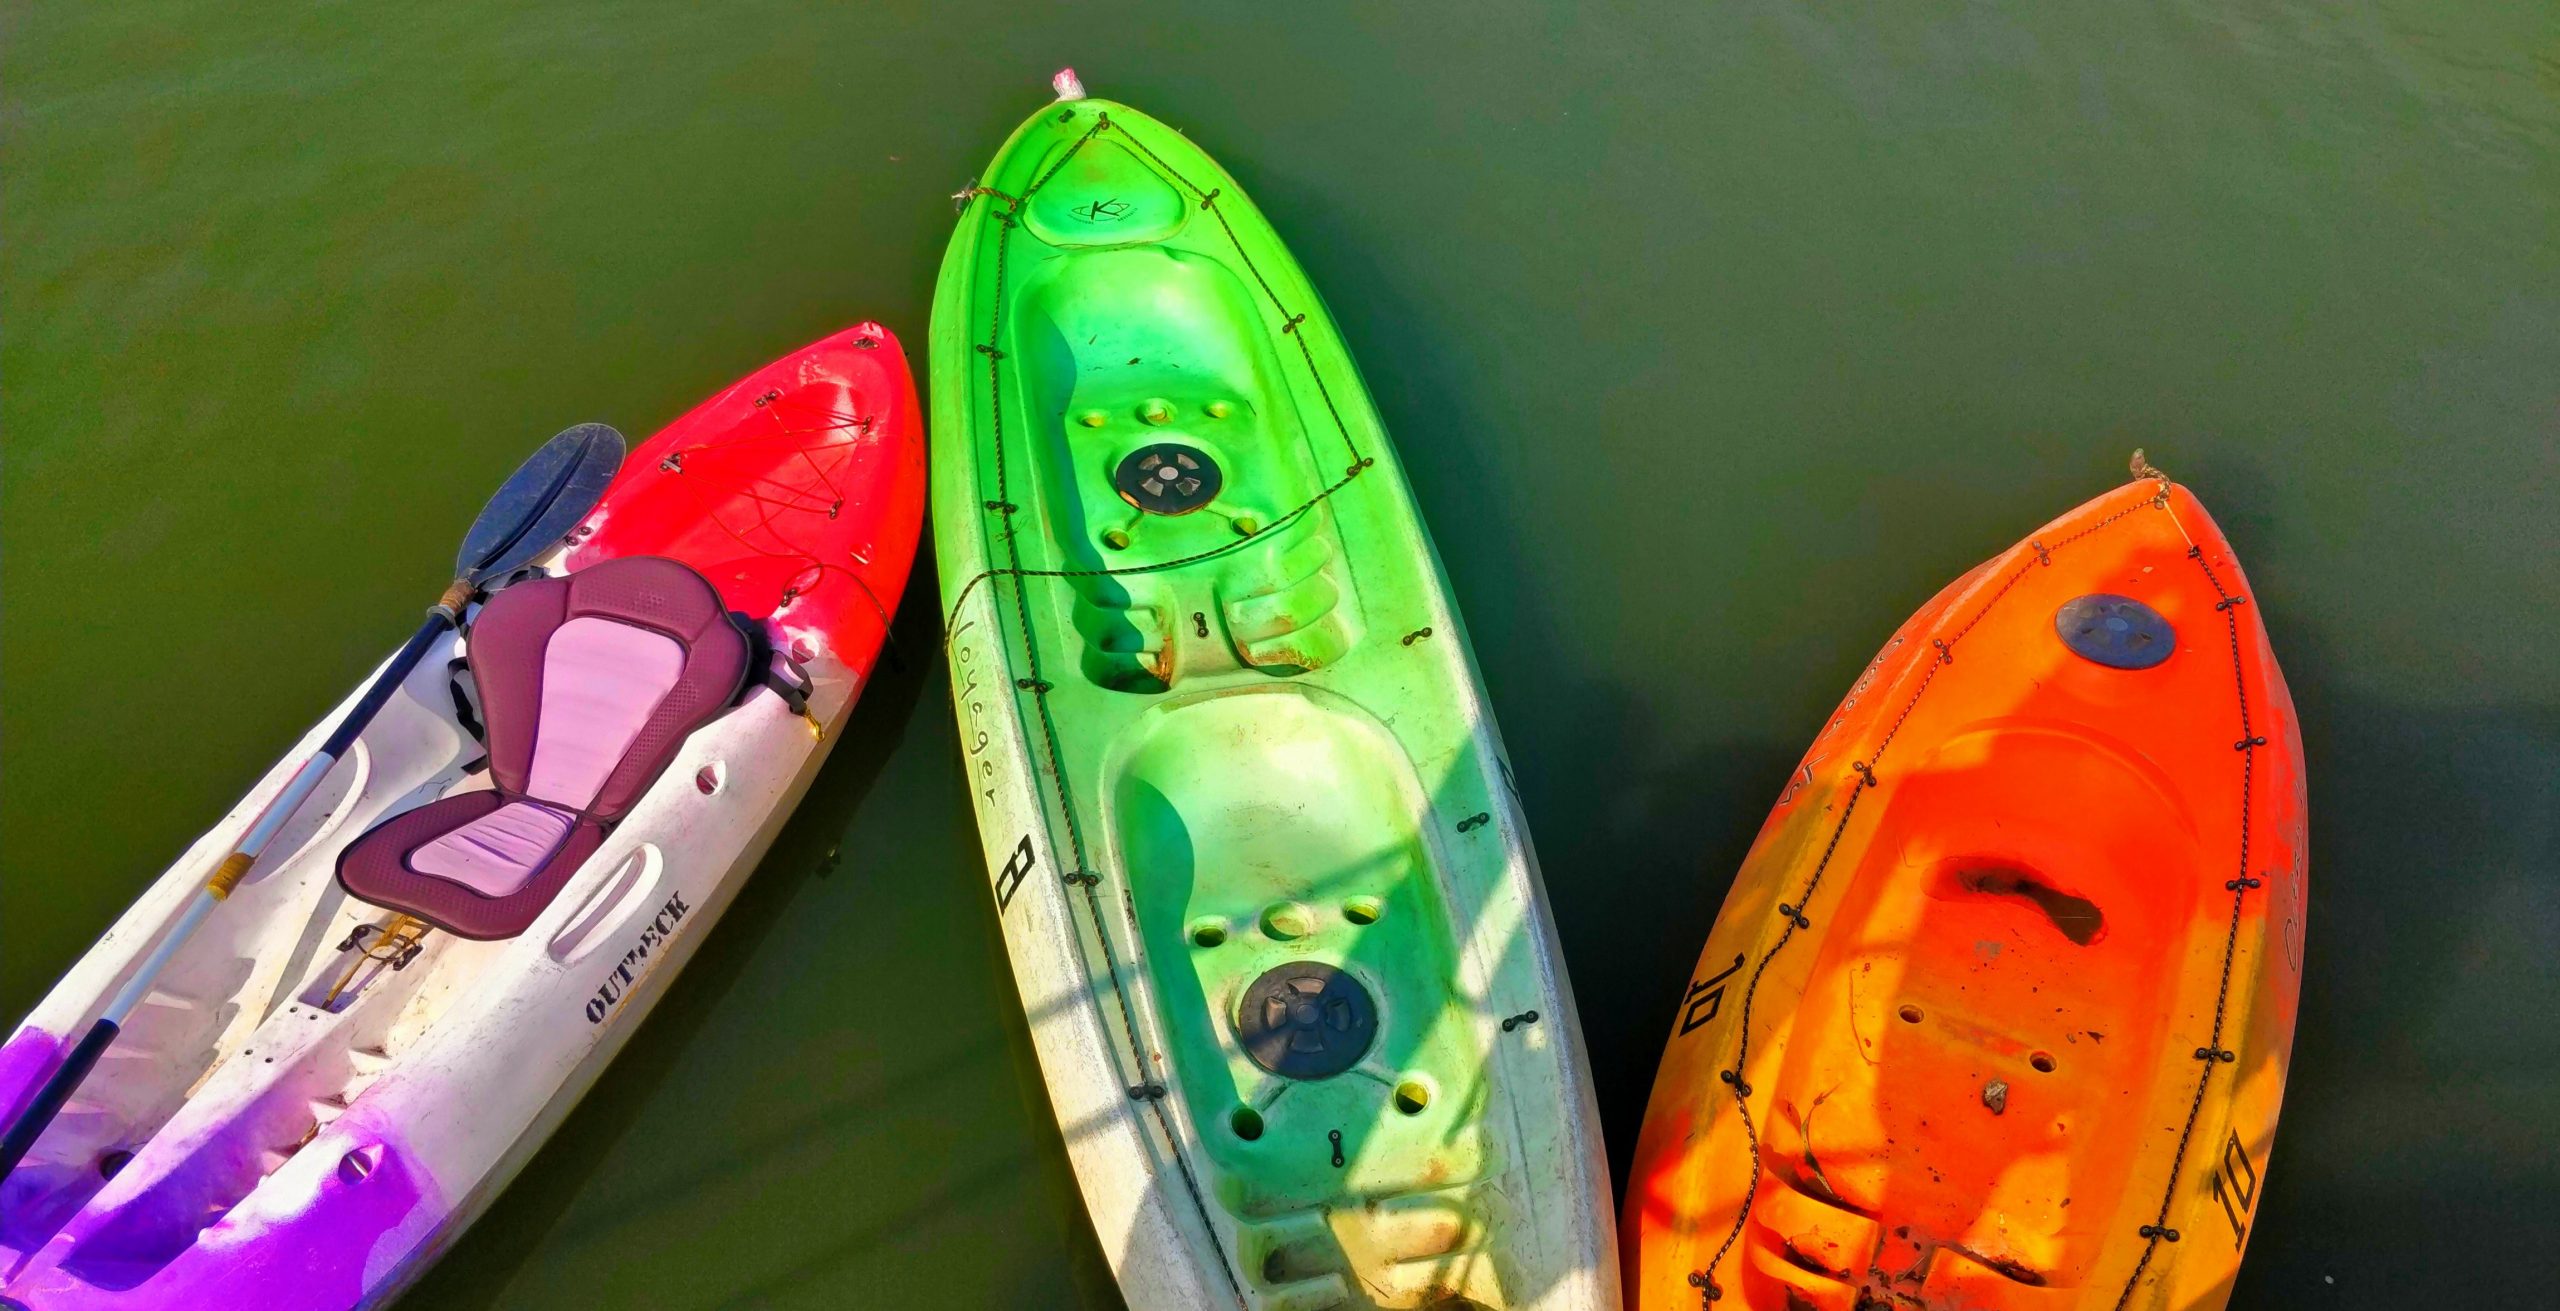 colorful boats